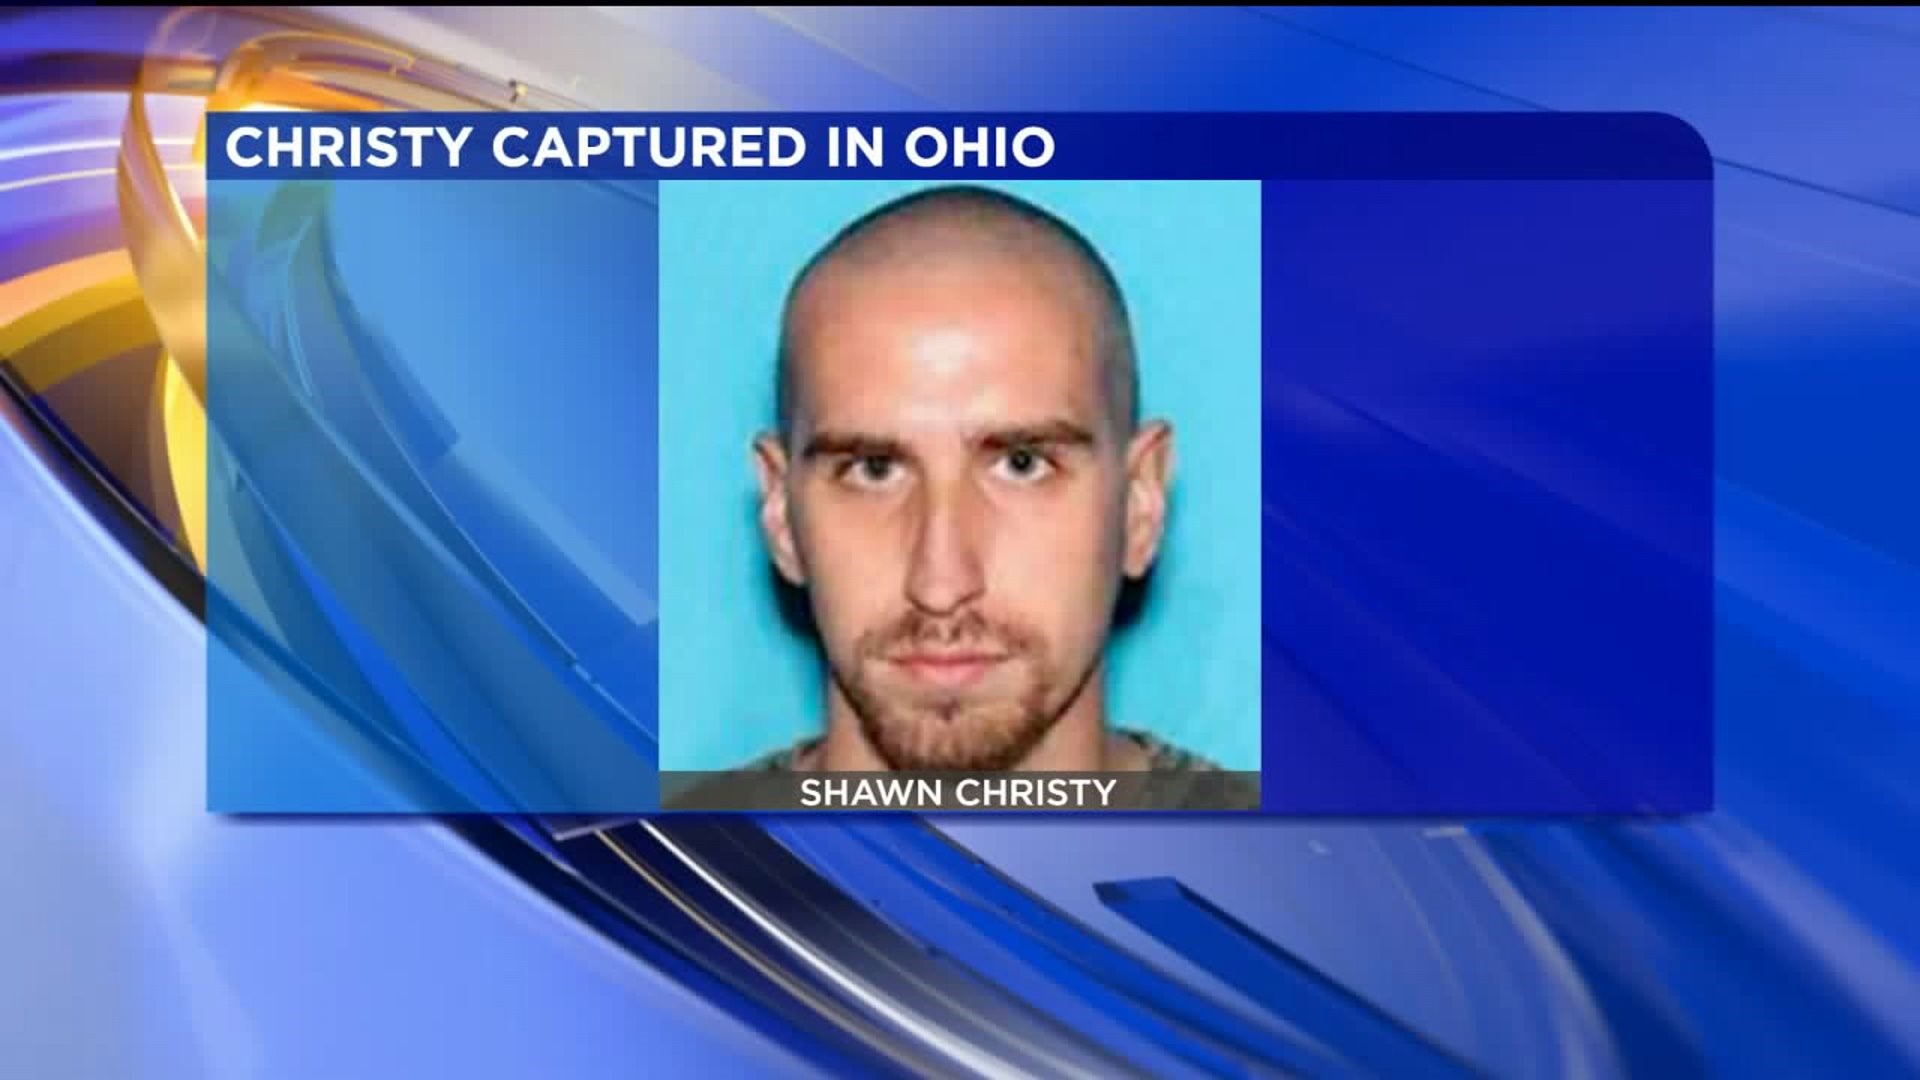 Shawn Christy, Wanted for Threatening the President, Caught in Ohio